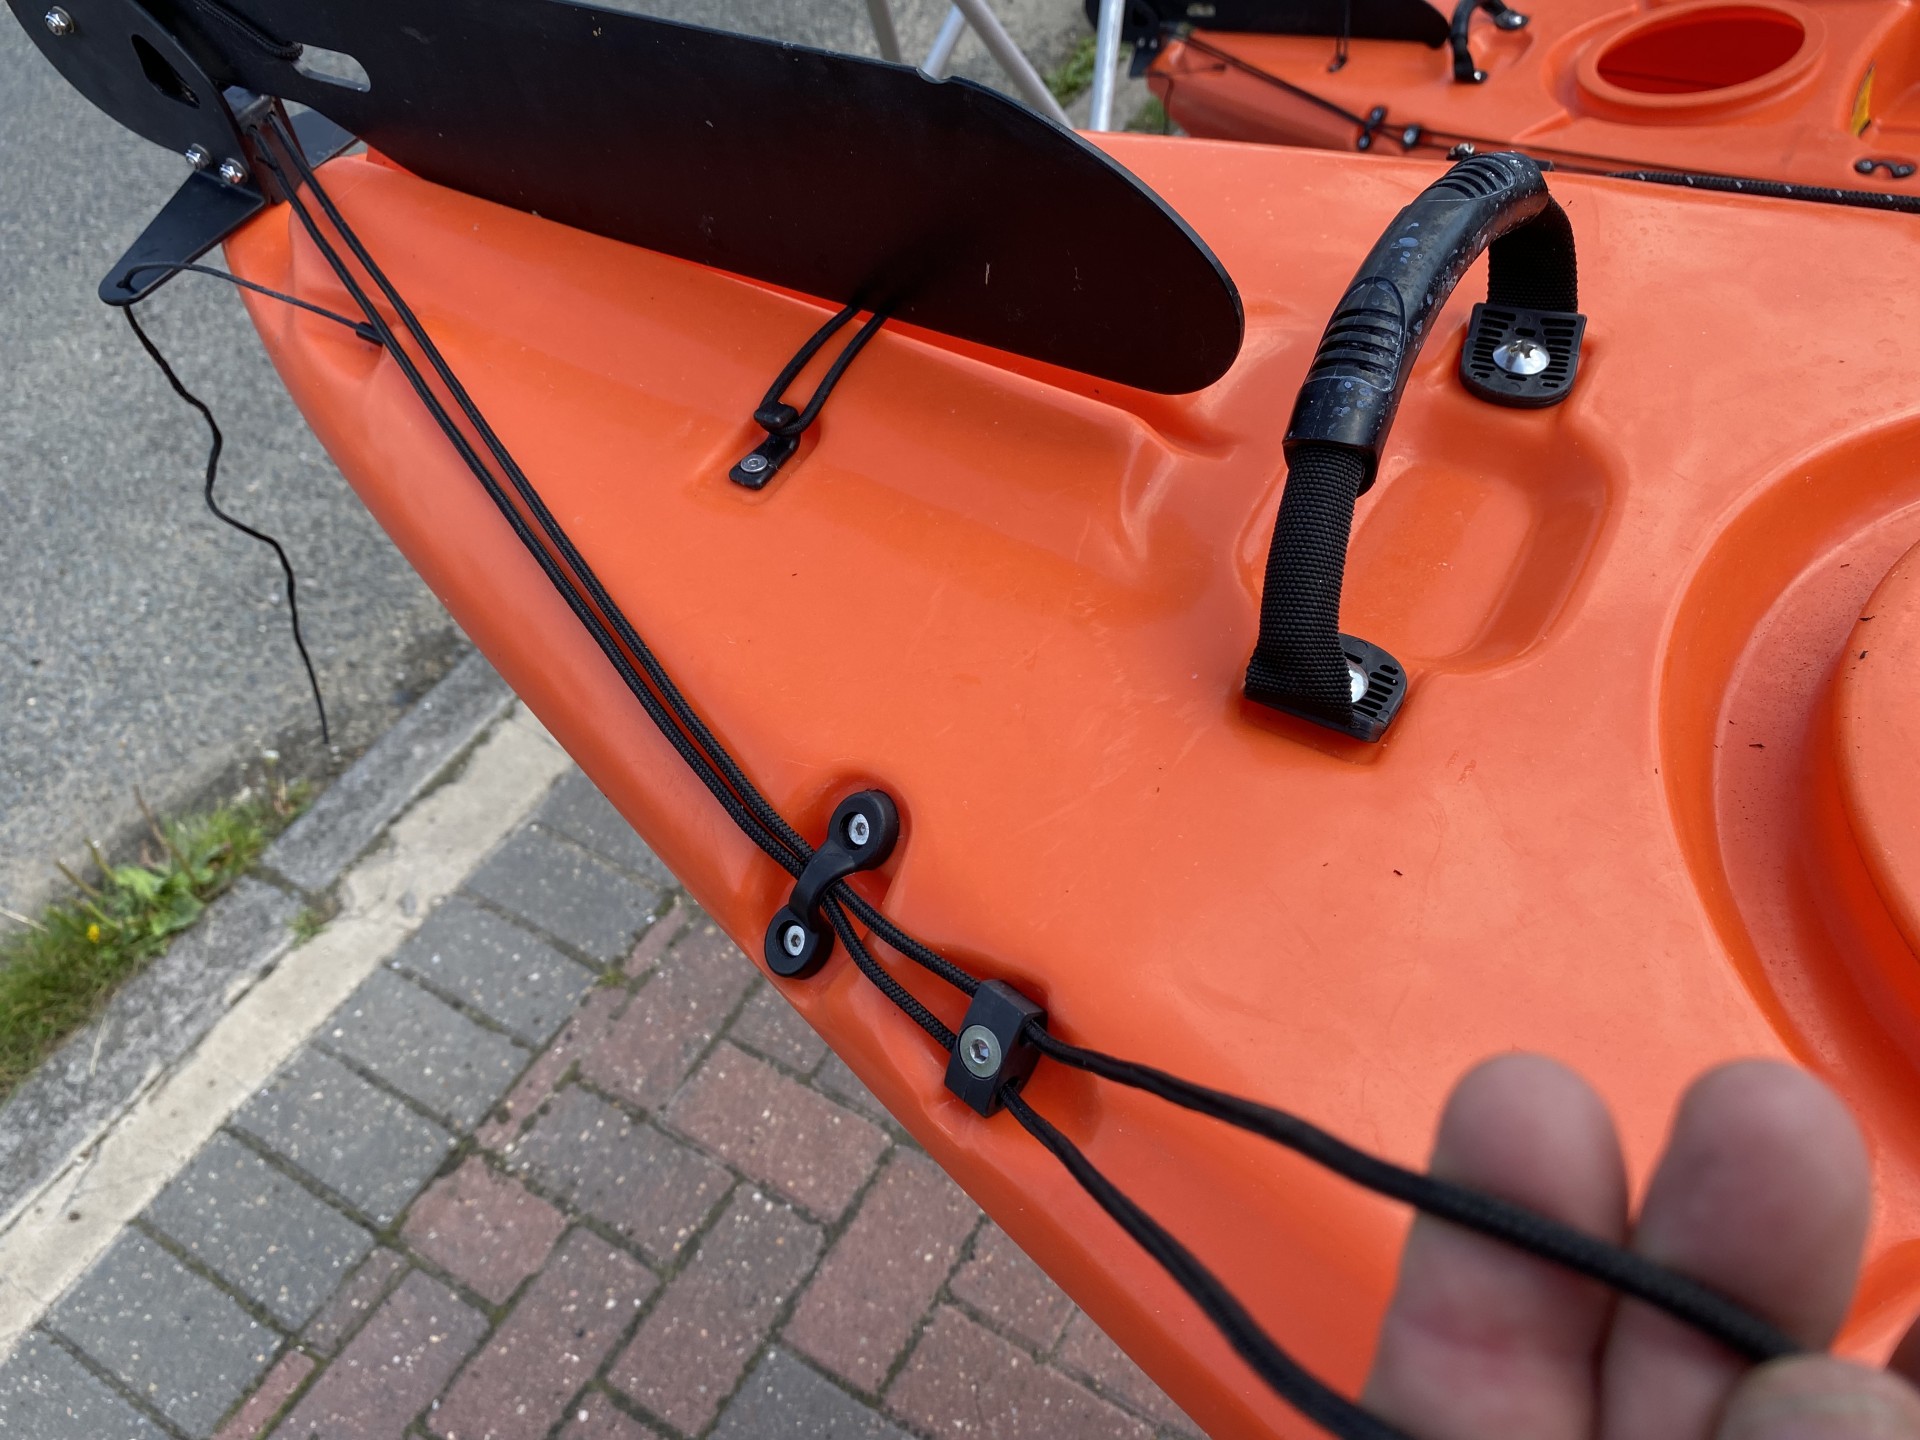 Sit-on-top kayak rudder showing the engagement cables being pulled through the deck guides.